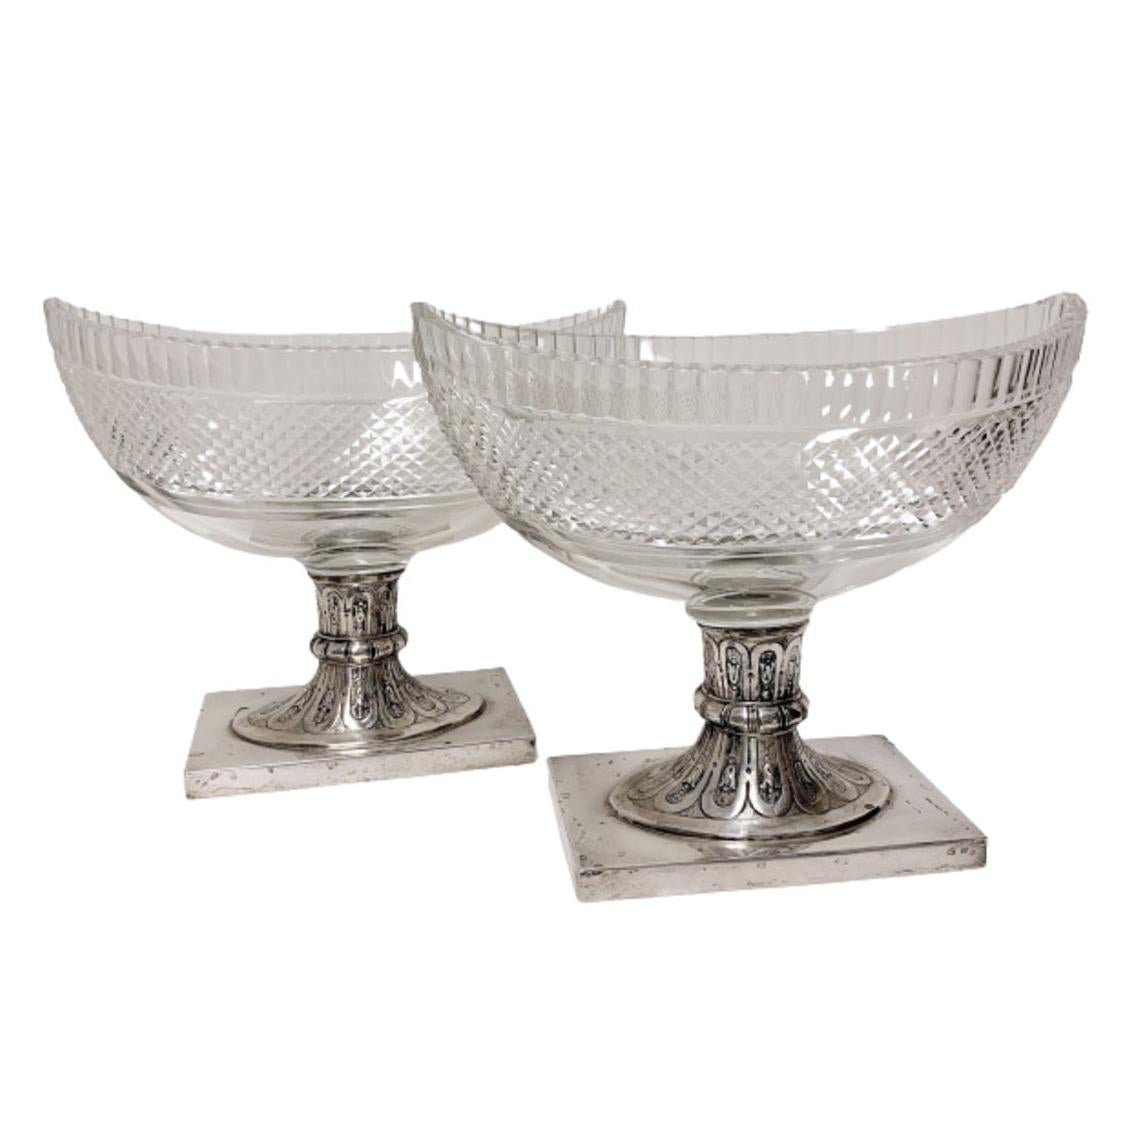 What is a glass compote?